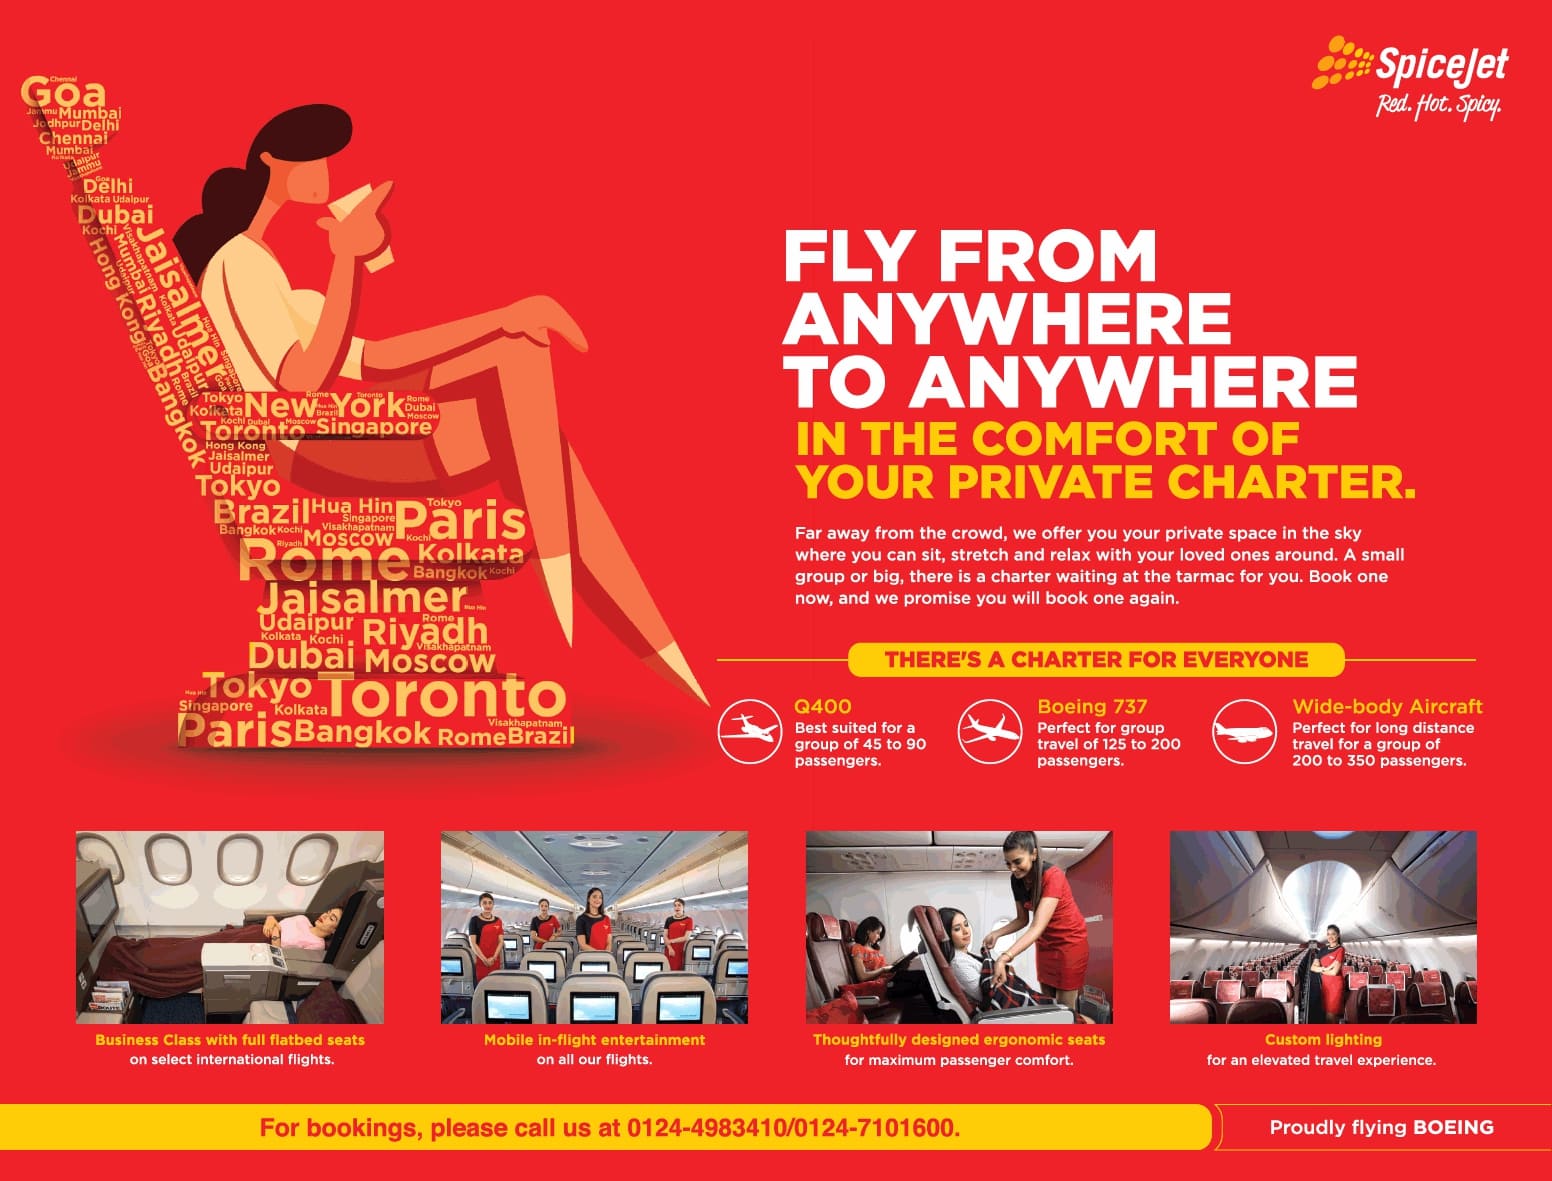 spicejet-fly-from-anywhere-to-anywhere-ad-times-of-india-mumbai-28-01-2021